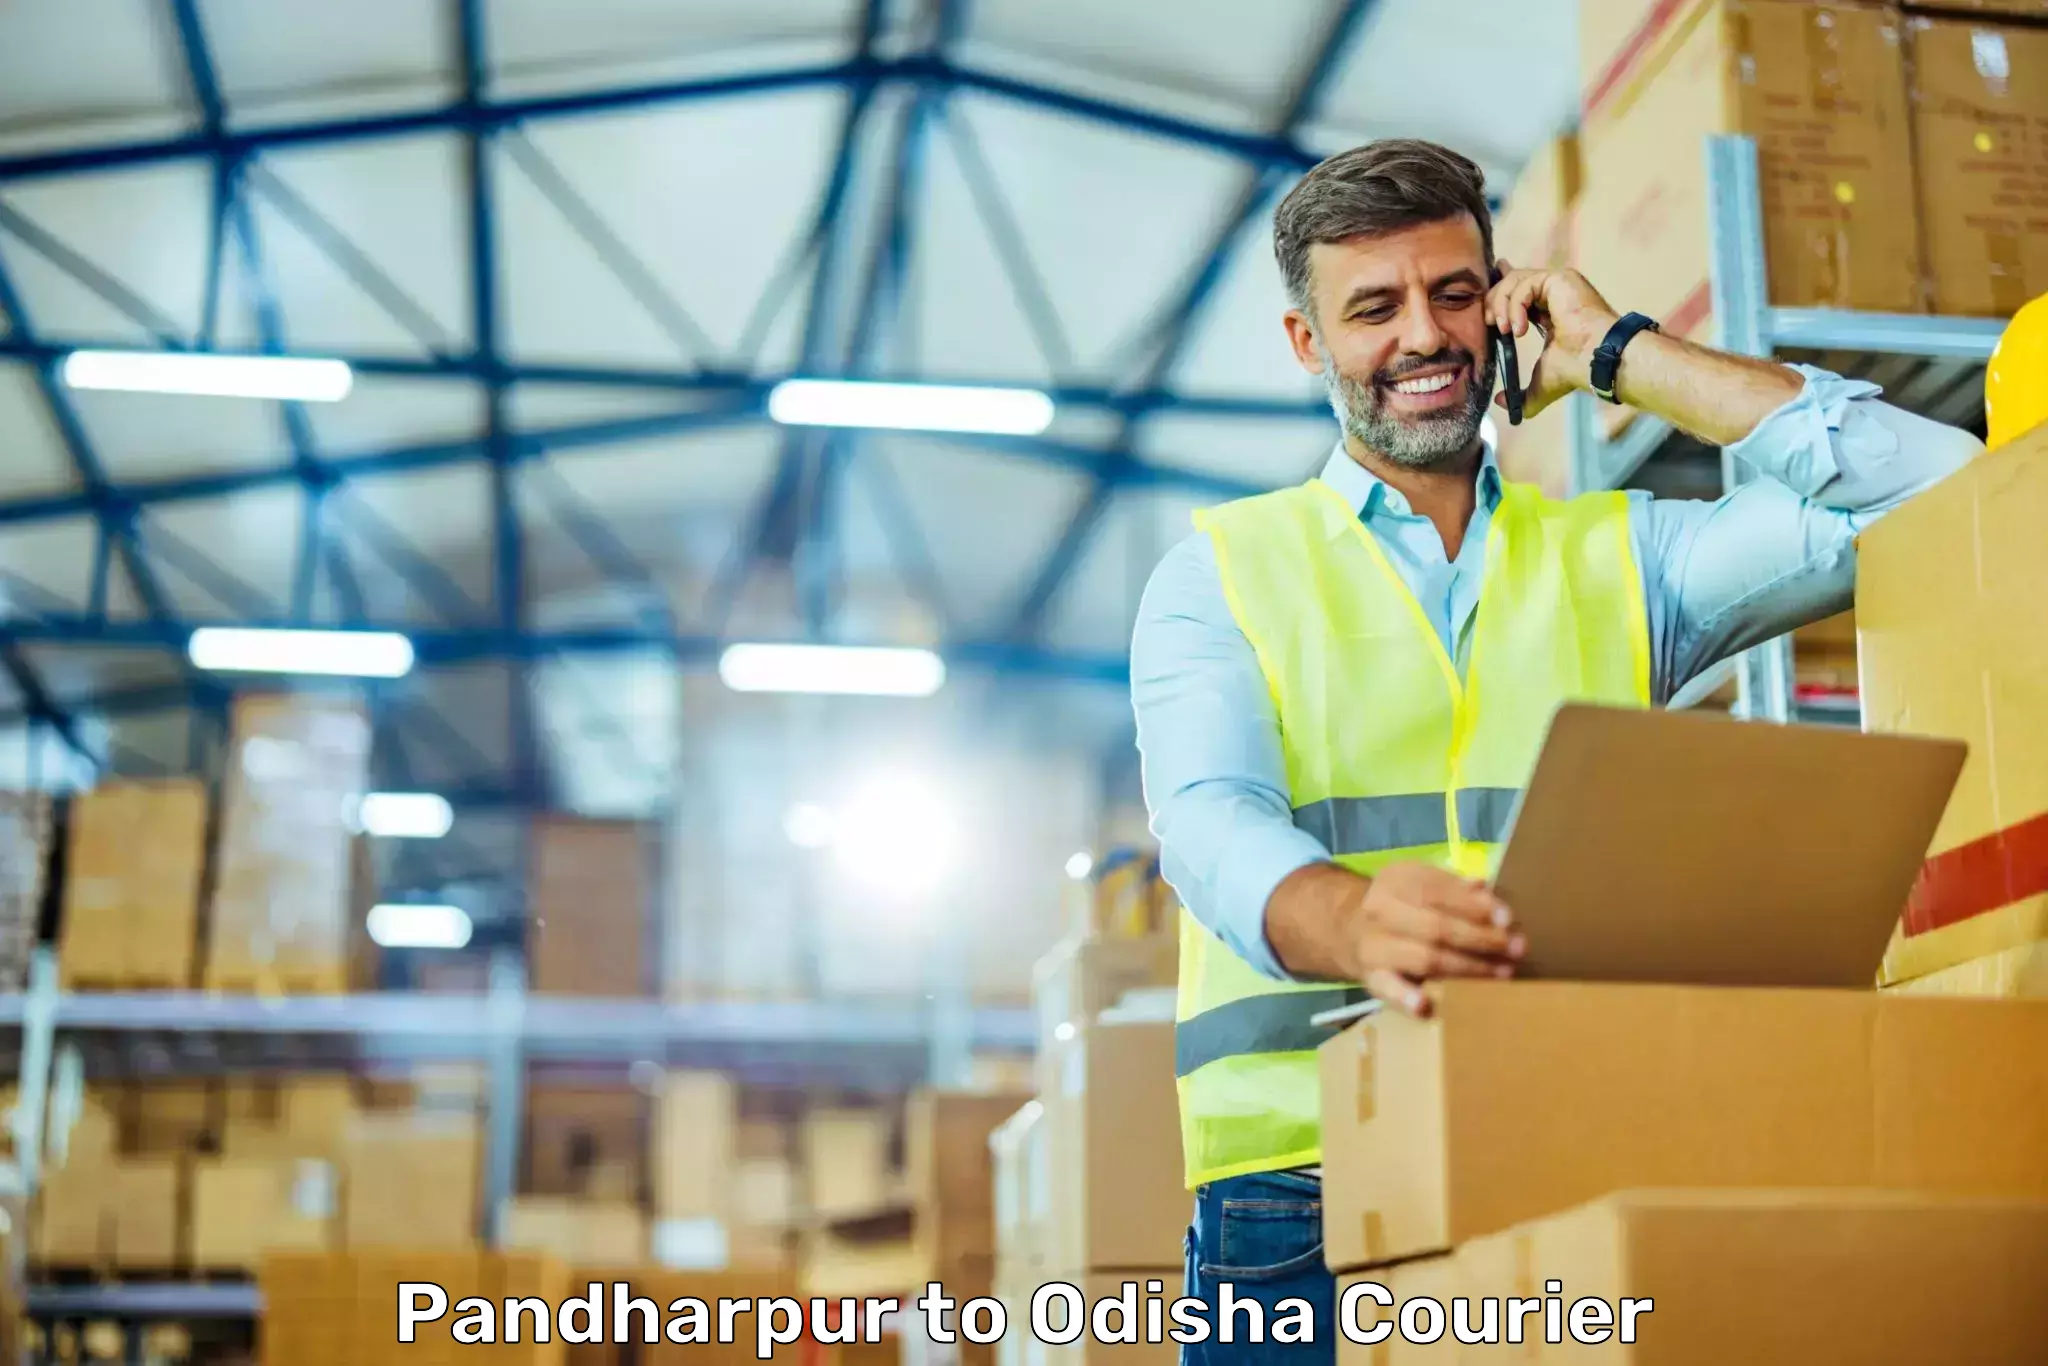 Reliable delivery network Pandharpur to Dhamanagar